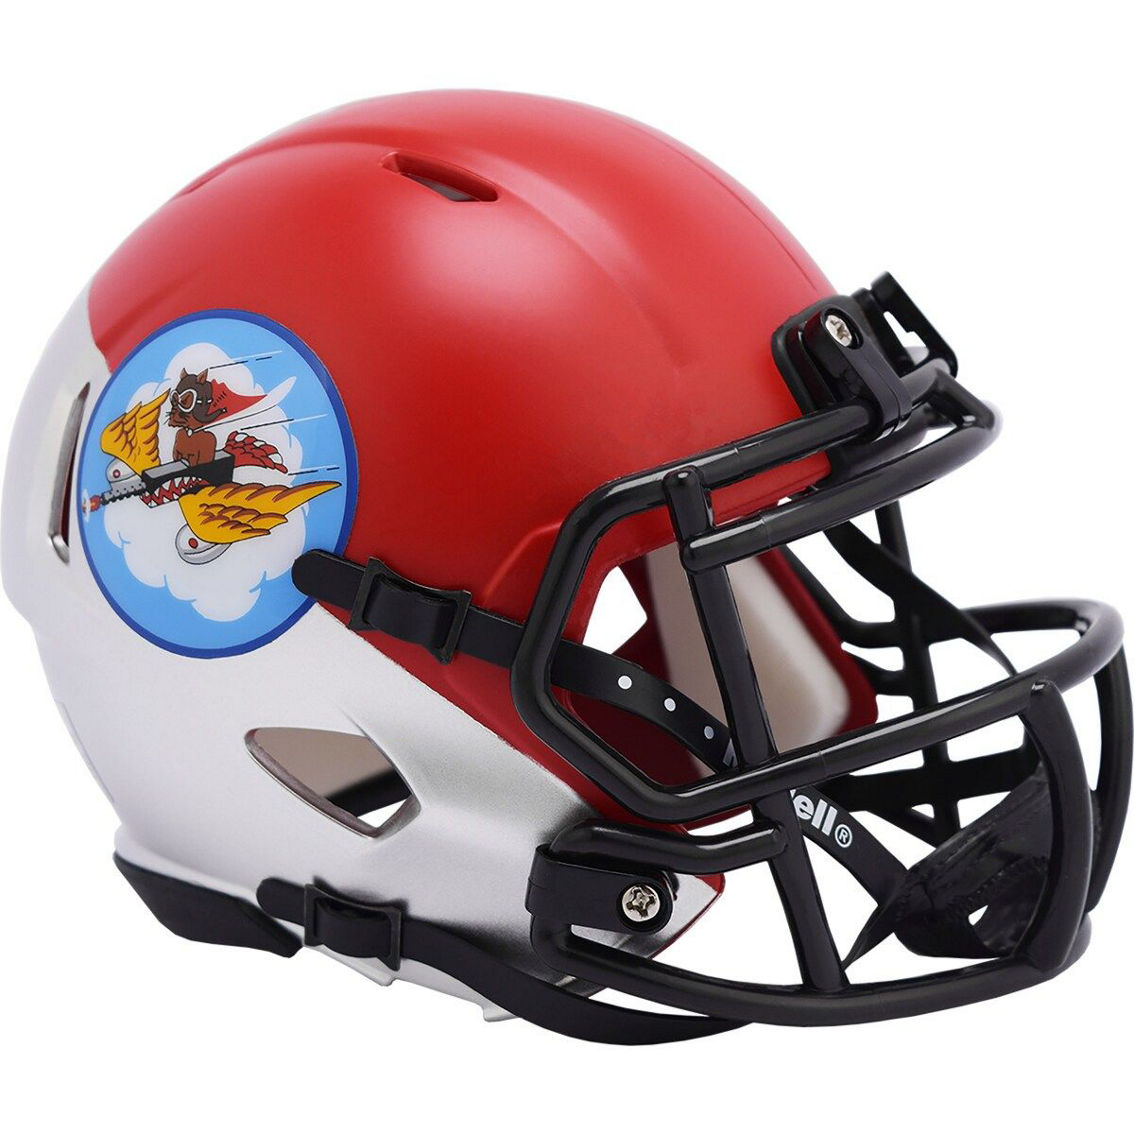 Riddell Air Force Falcons Unsigned Riddell Tuskegee 301st Squadron Speed Mini Helmet - Image 2 of 2